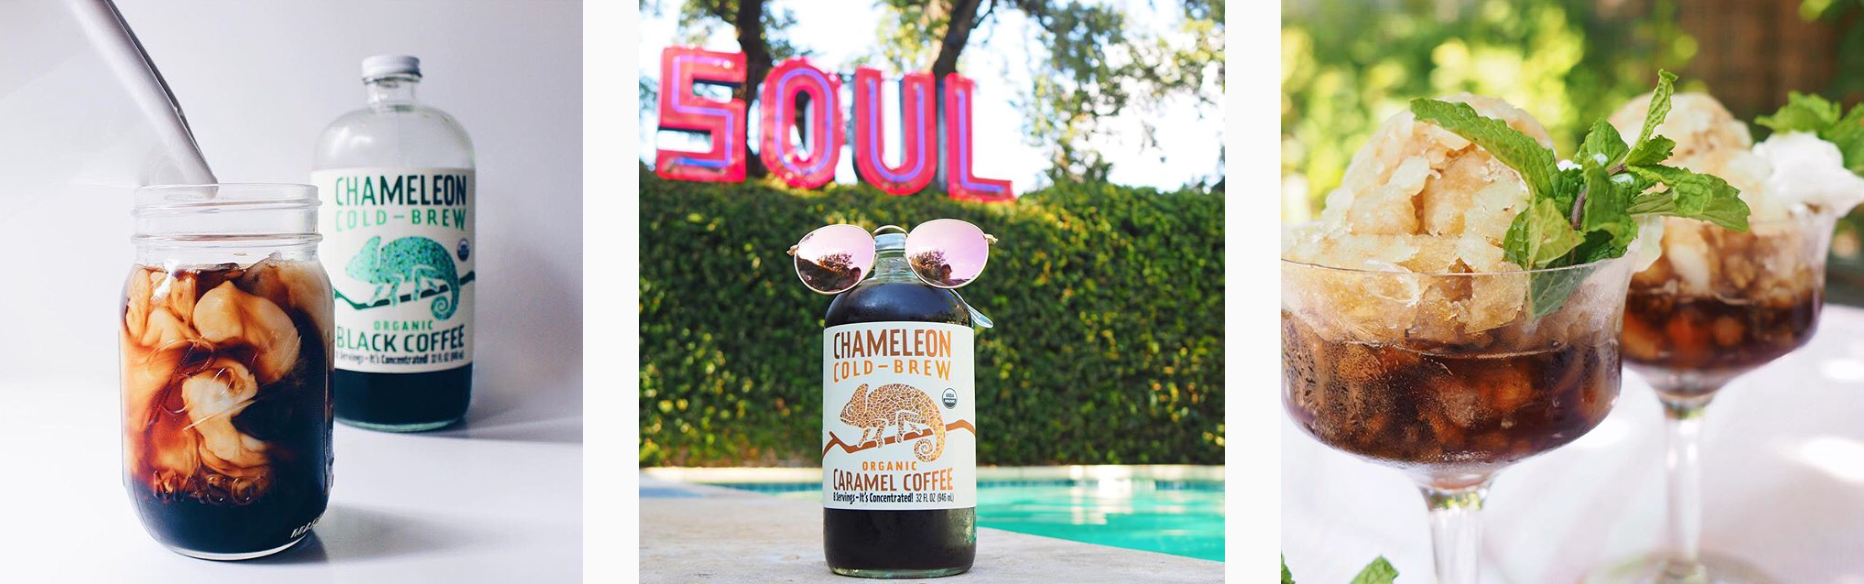 National Coffee Day - PLANOLY Blog - Chameleon Cold Brew 